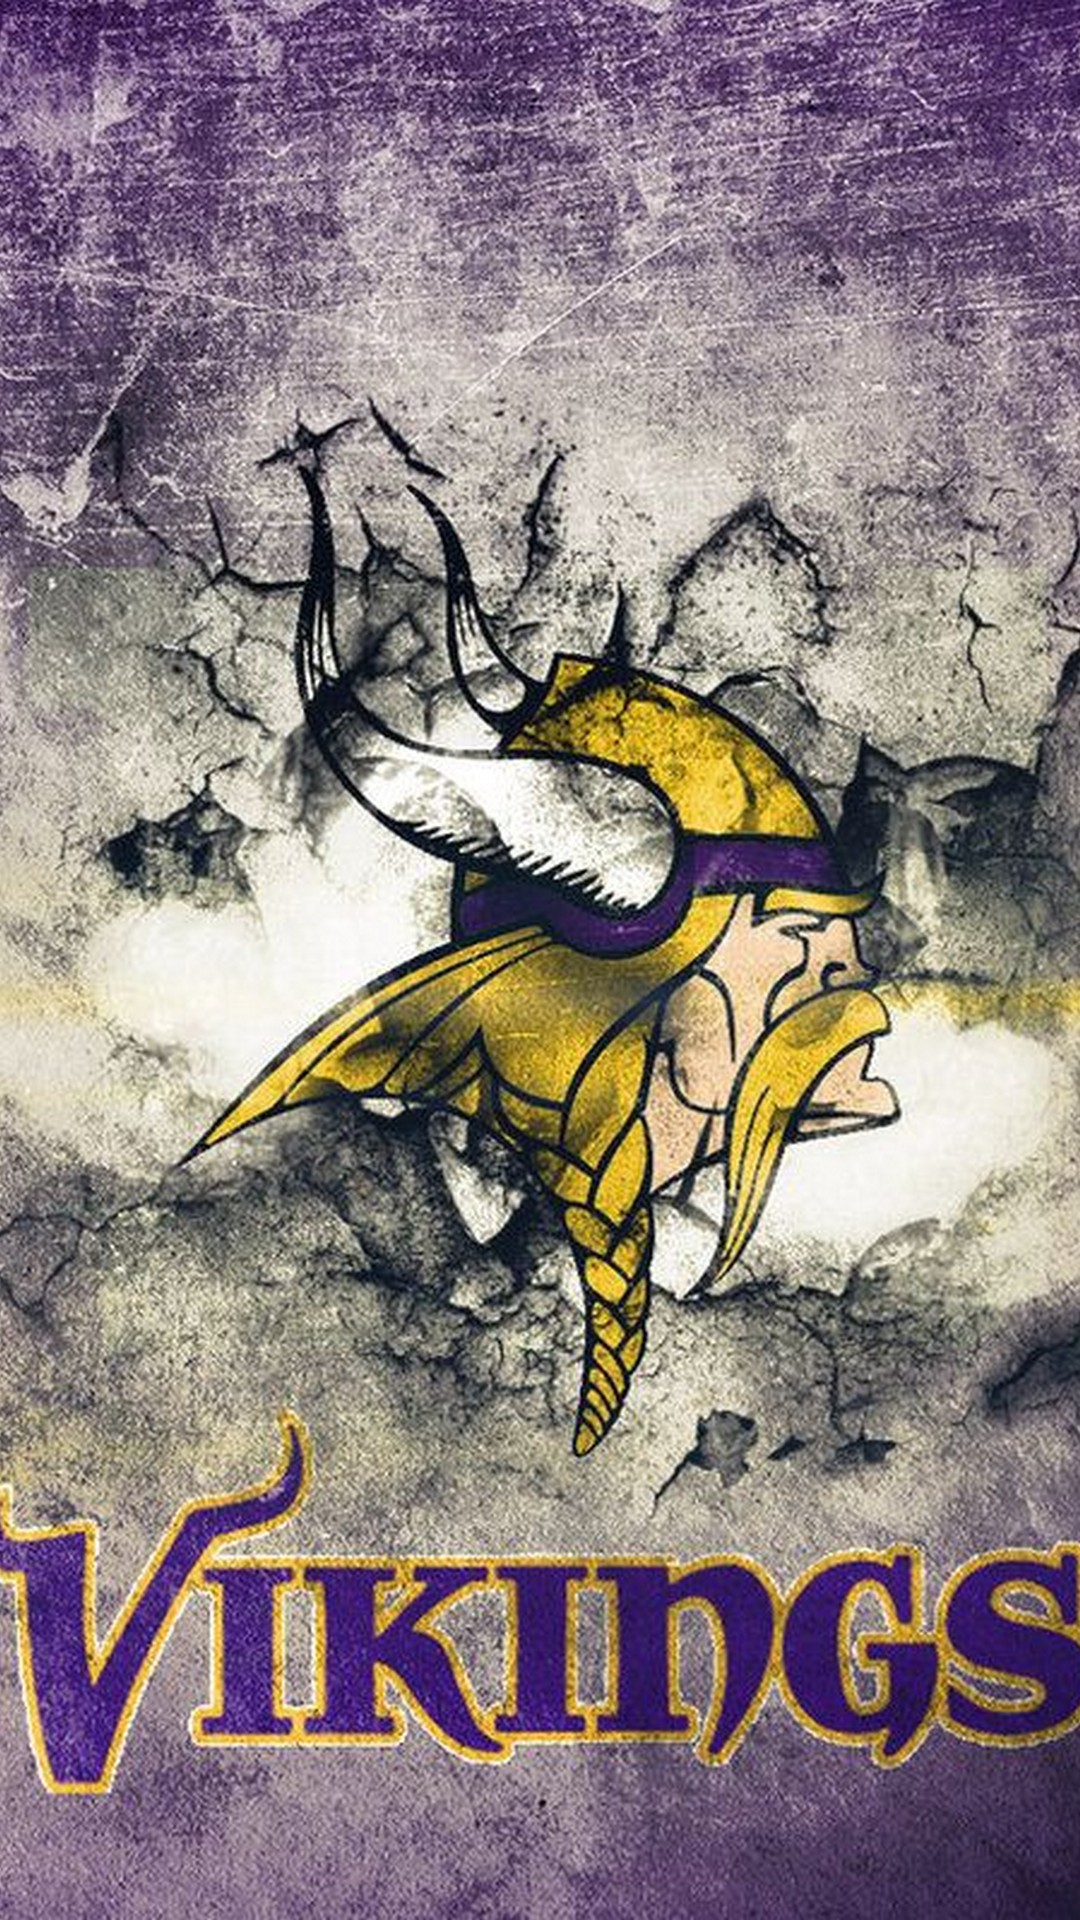 Minnesota Vikings iPhone Wallpaper Size With high-resolution 1080X1920 pixel. Donwload and set as wallpaper for your iPhone X, iPhone XS home screen backgrounds, XS Max, XR, iPhone8 lock screen wallpaper, iPhone 7, 6, SE, and other mobile devices